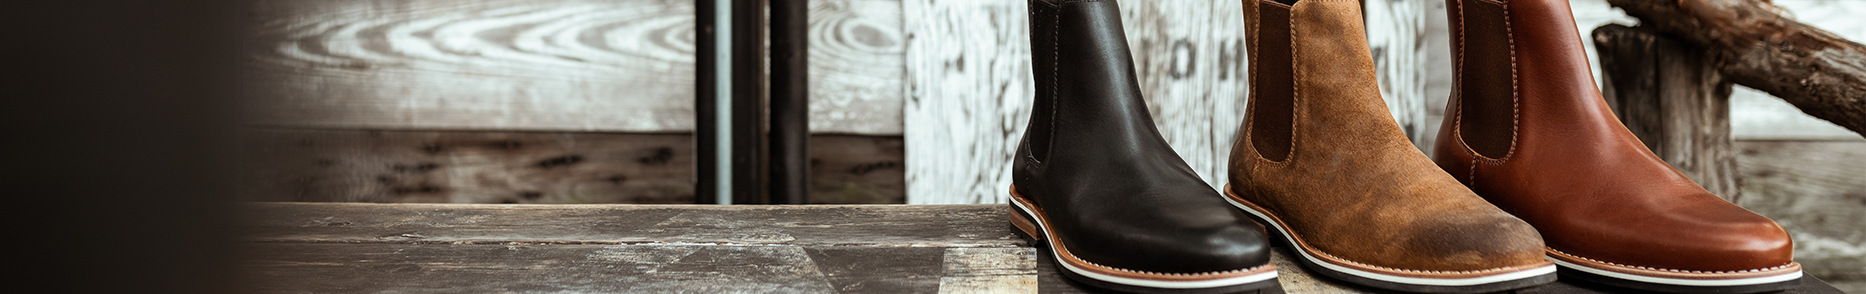 HELM Men's Chelsea Boot, The Finn | Available in Black, Brown, and ...